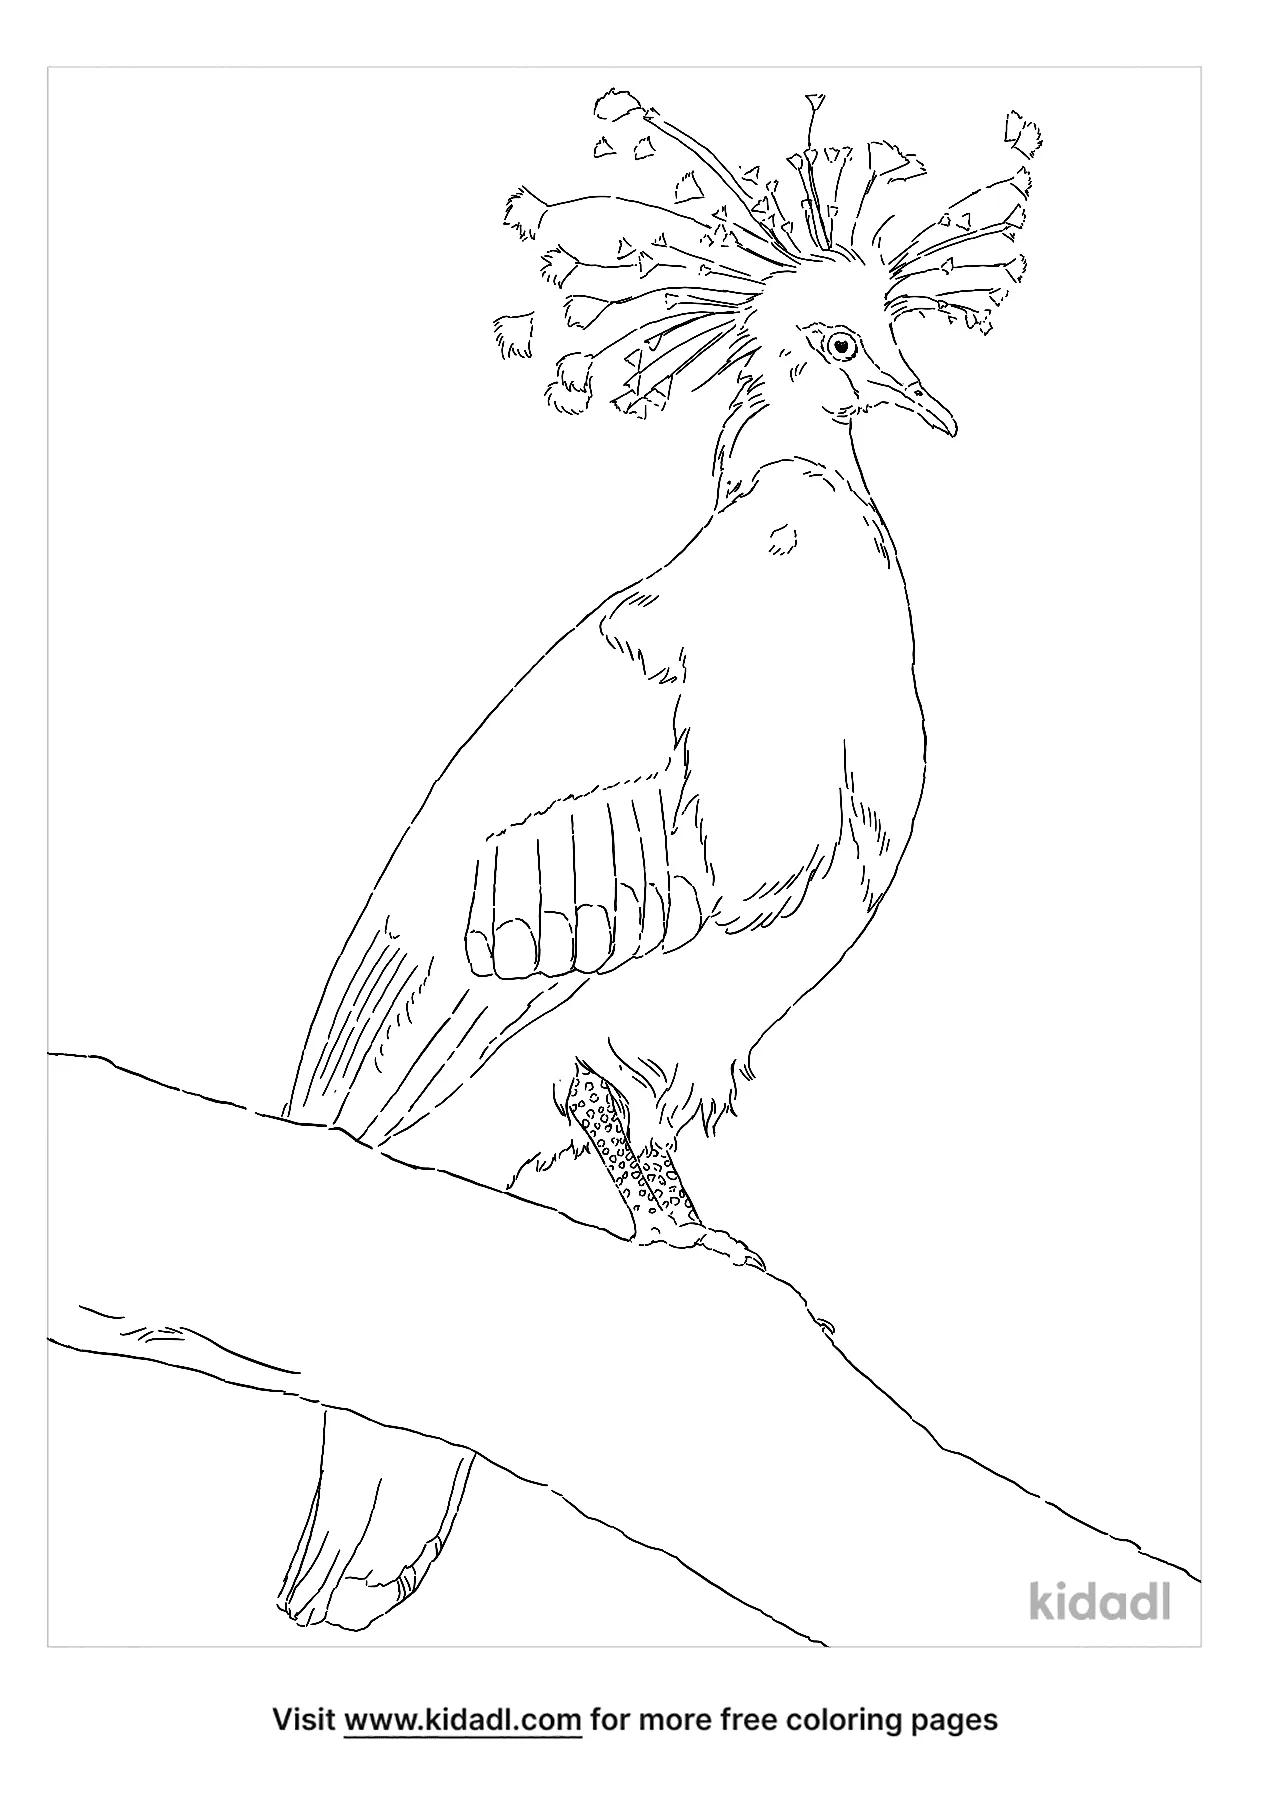 Victoria Crowned Pigeon Coloring Page